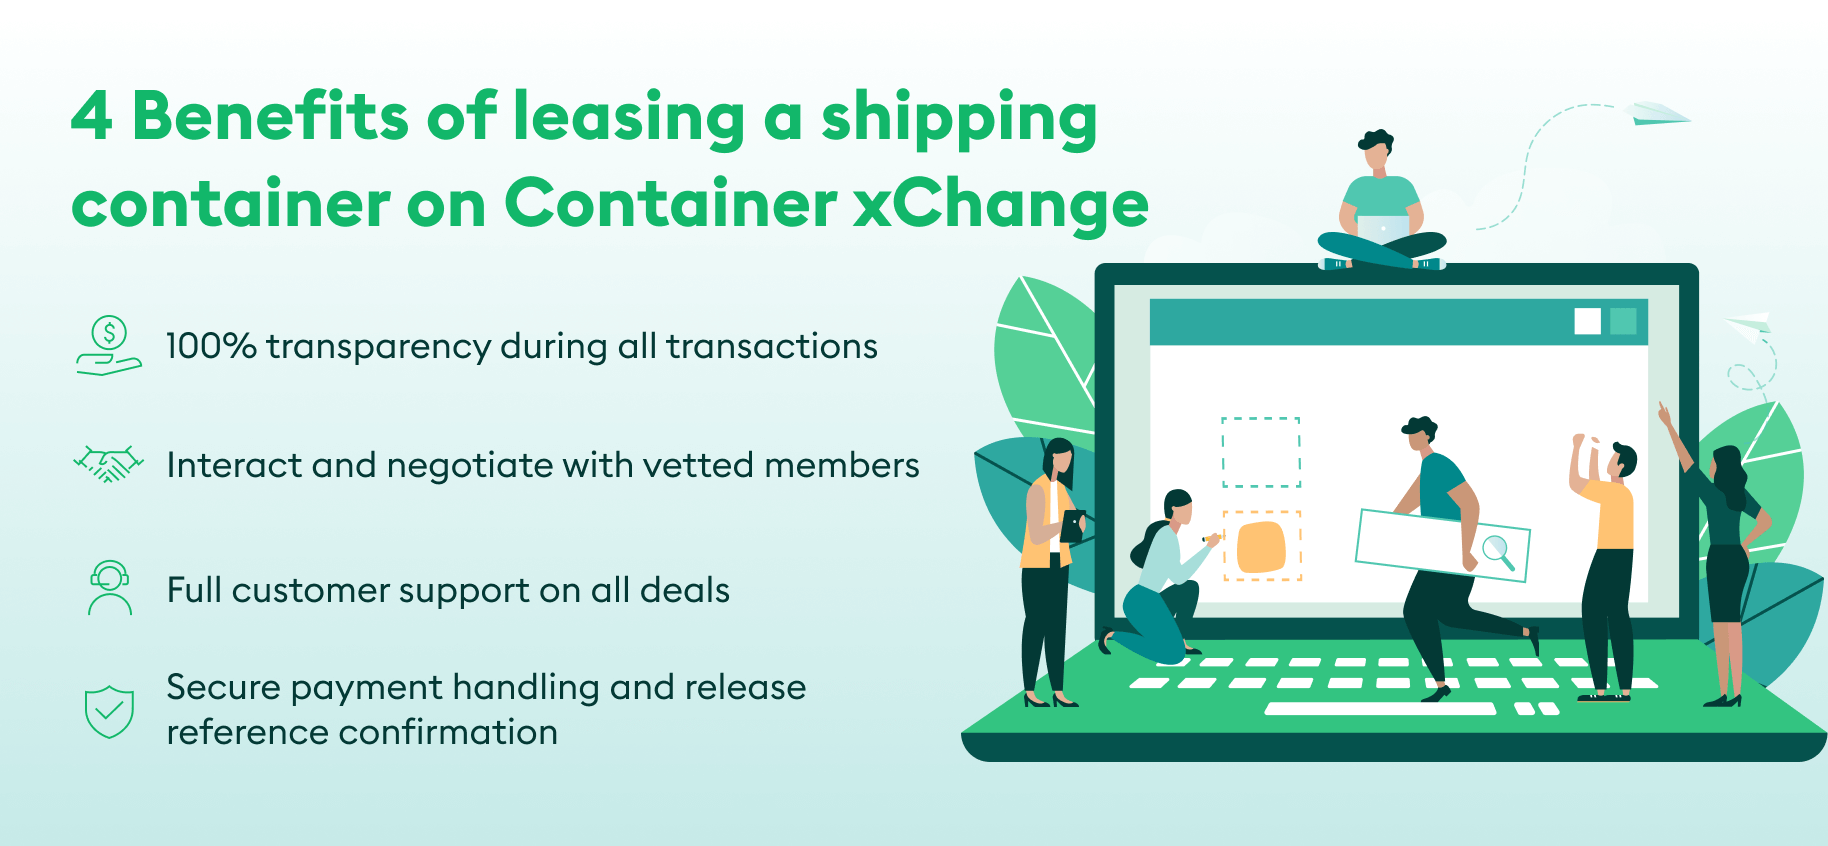 4 benefits of leasing a shipping container on container xchange